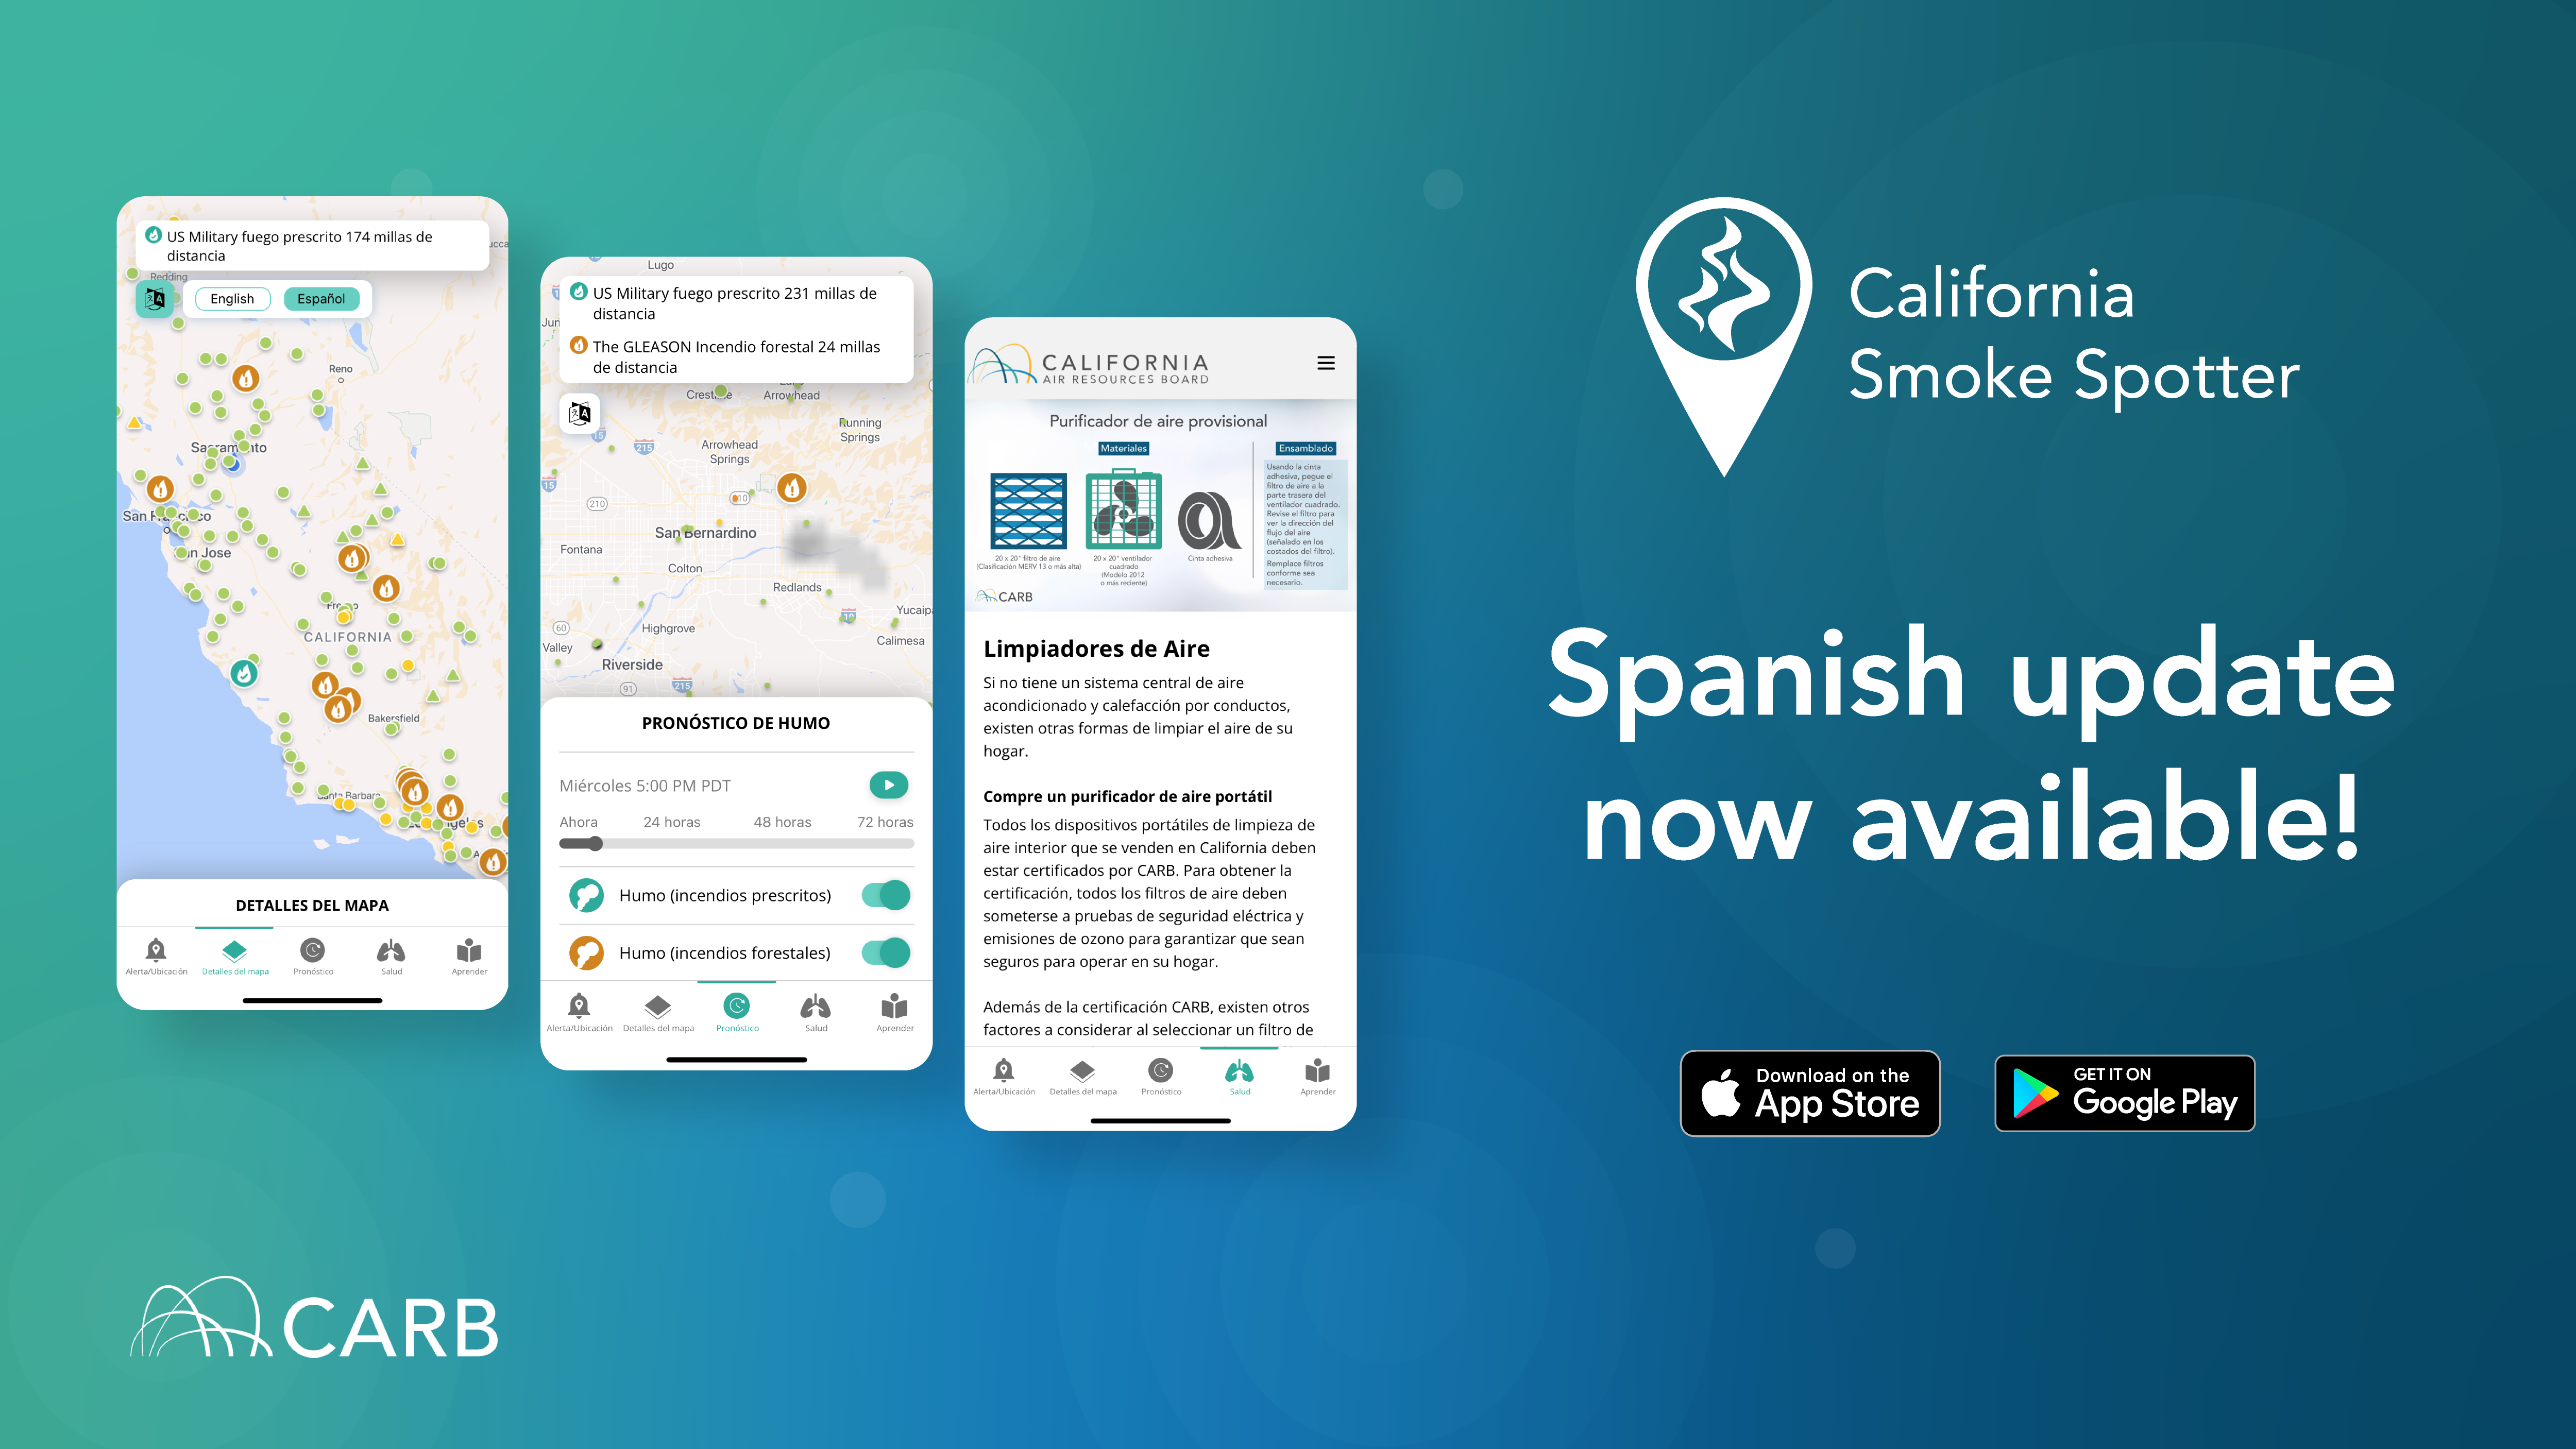 California Smoke Spotter - Spanish update now available